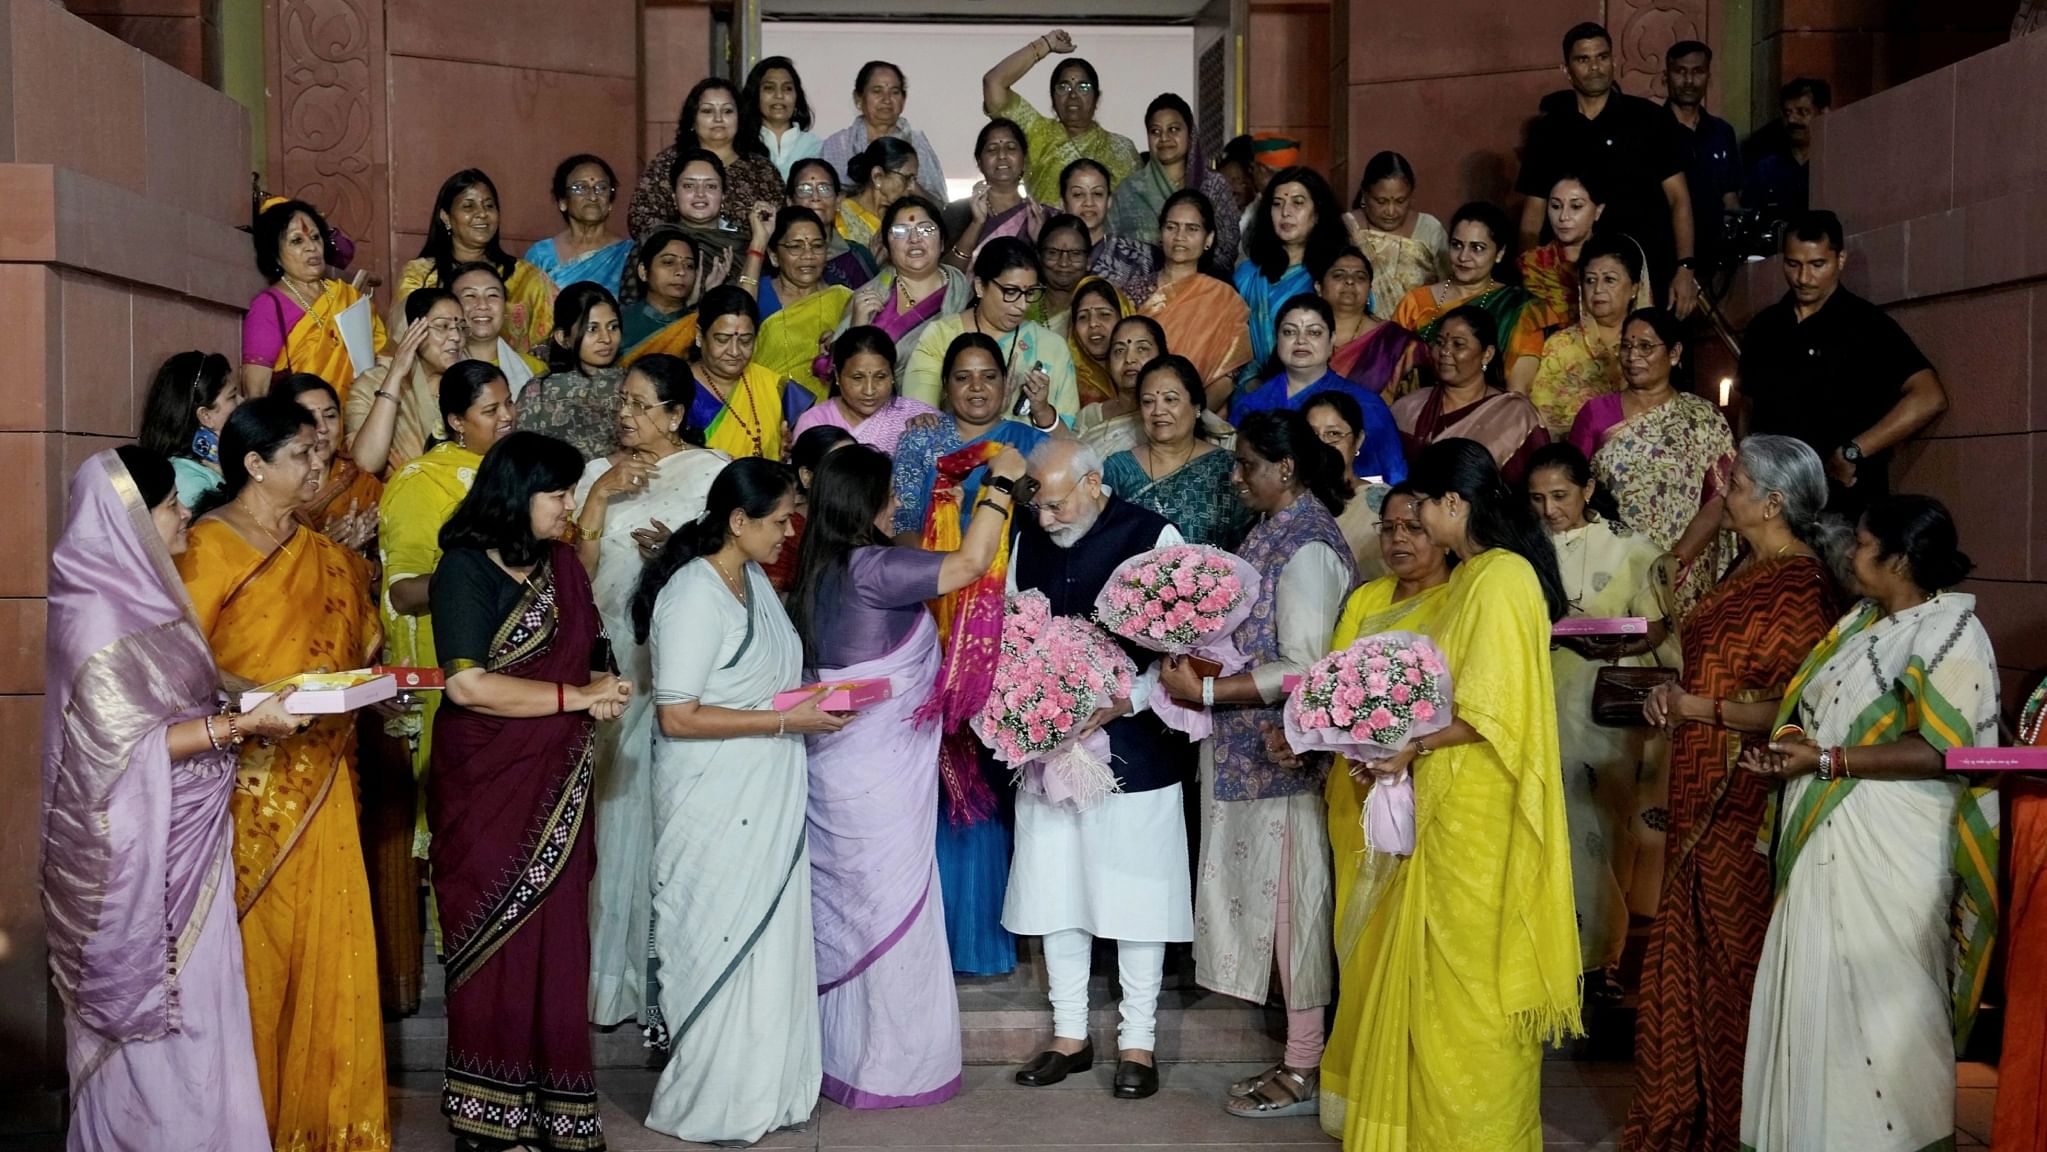 <div class="paragraphs"><p>Women MPs felicitate PM Modi while celebrating the on the historic passage of Nari Shakti Vandan Adhiniyam (women's reservation bill) by the Rajya Sabha in the special session of the Parliament.</p></div>